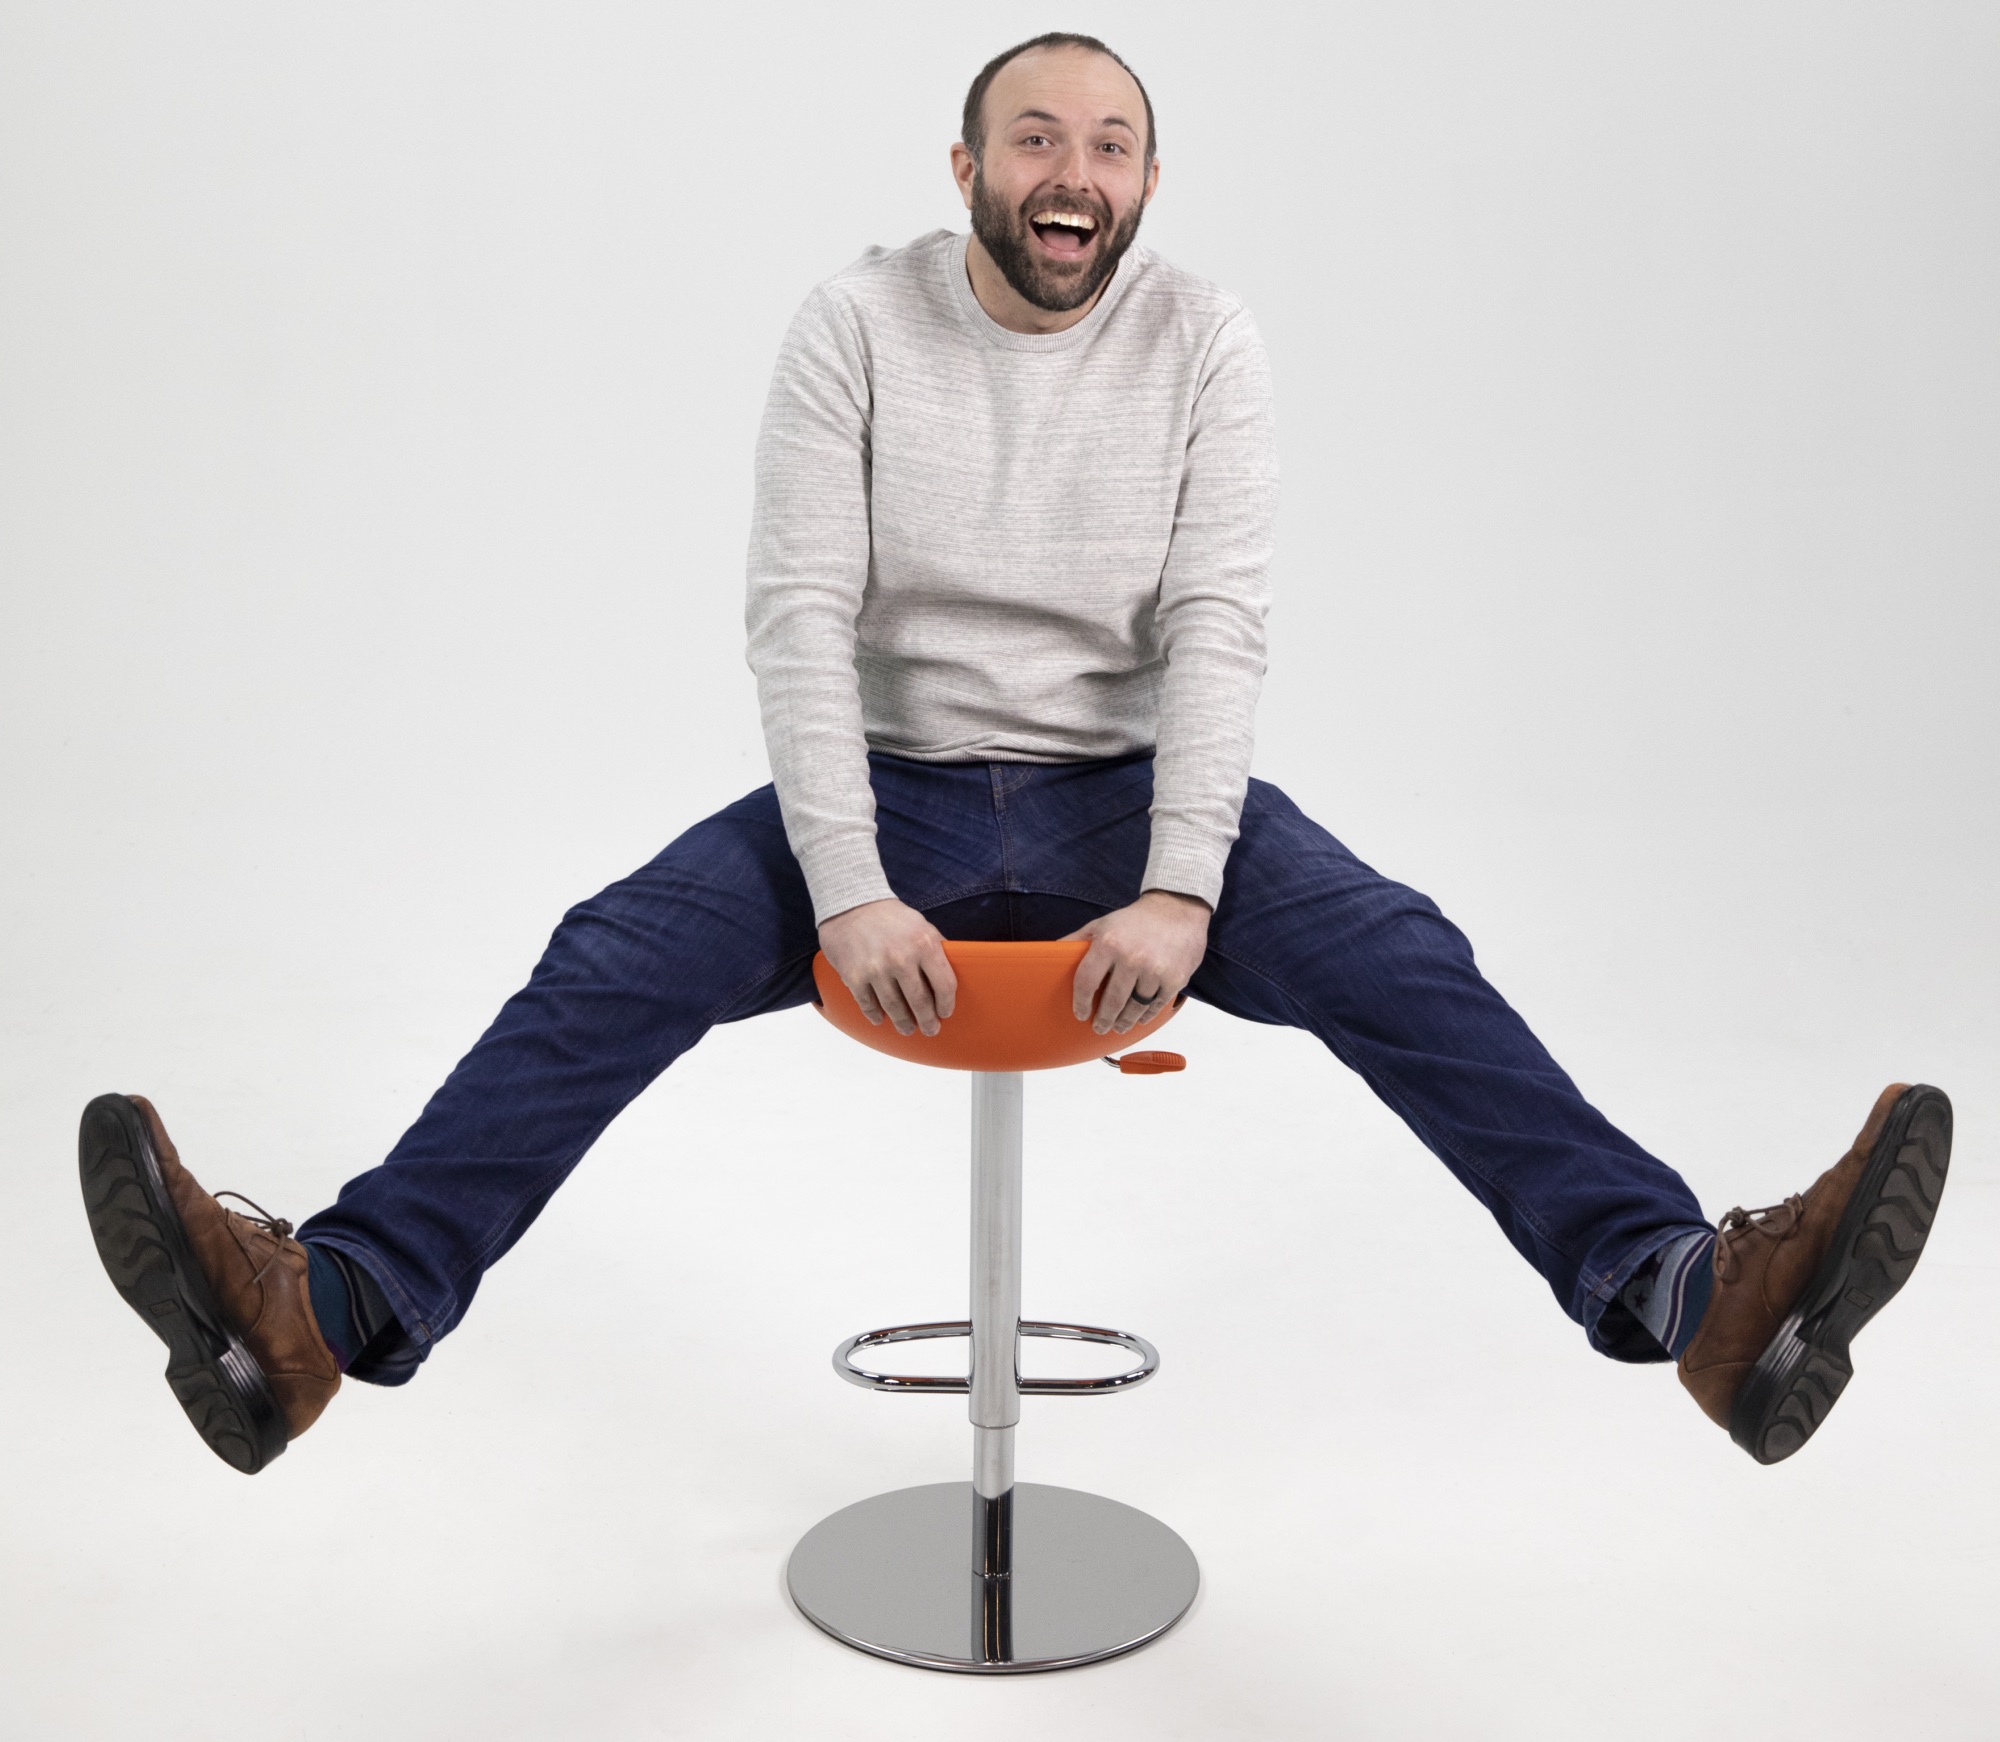 Tim straddling on a stool with a goofy facial expression